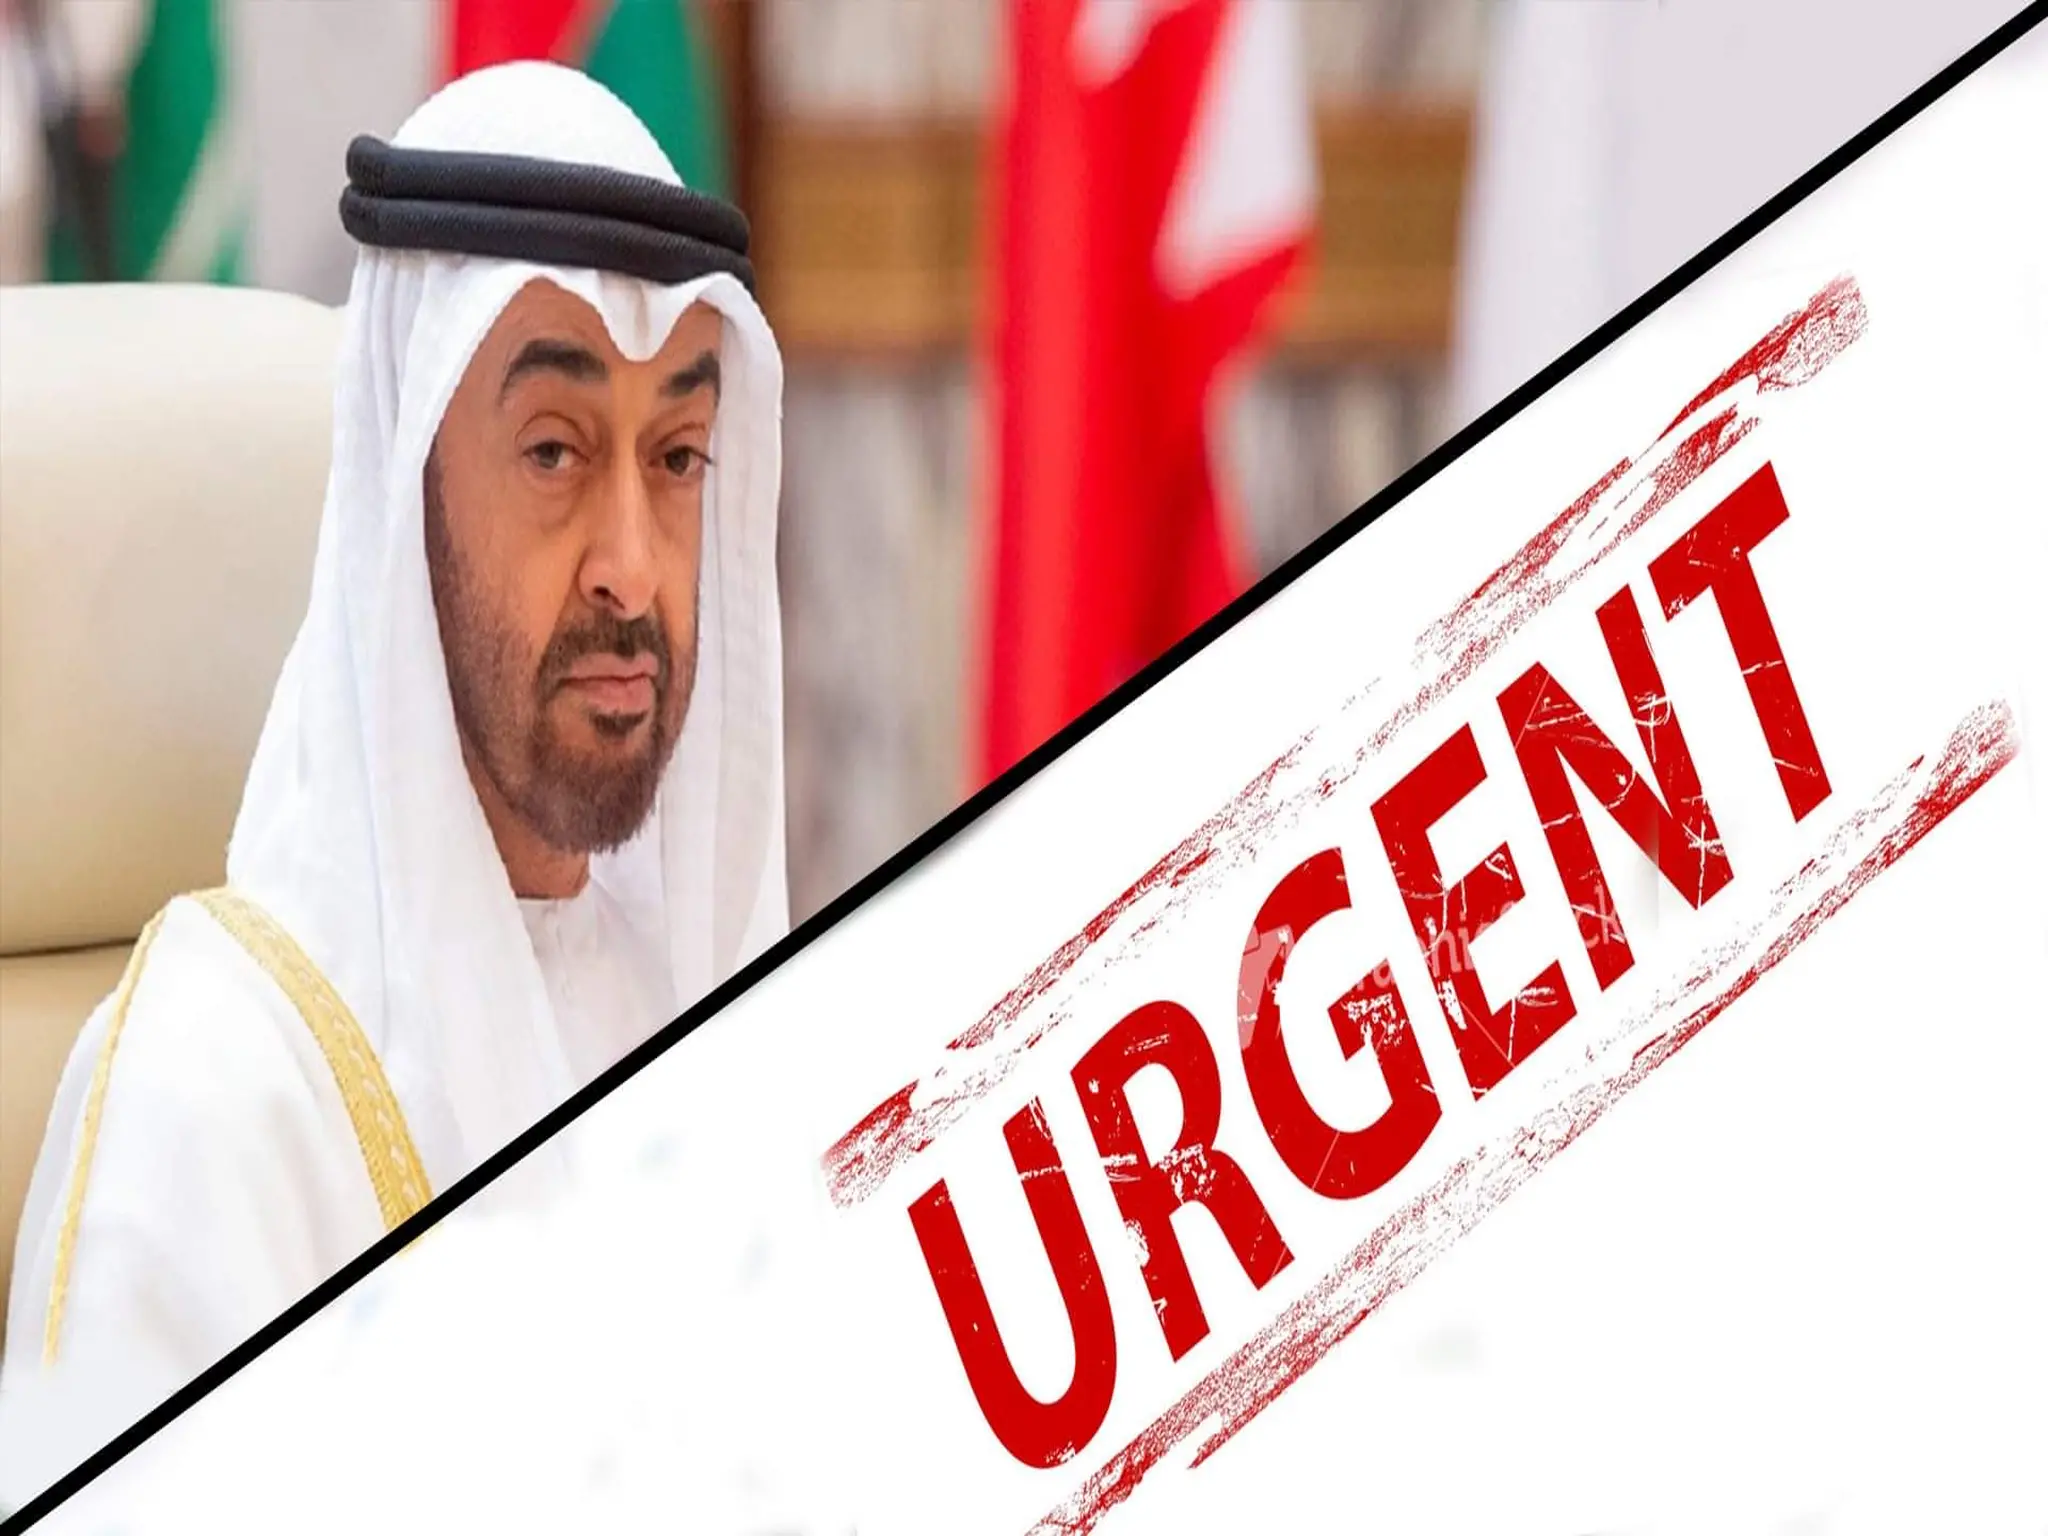 Urgent UAE: A new federal law from President Sheikh Mohammed bin Zayed